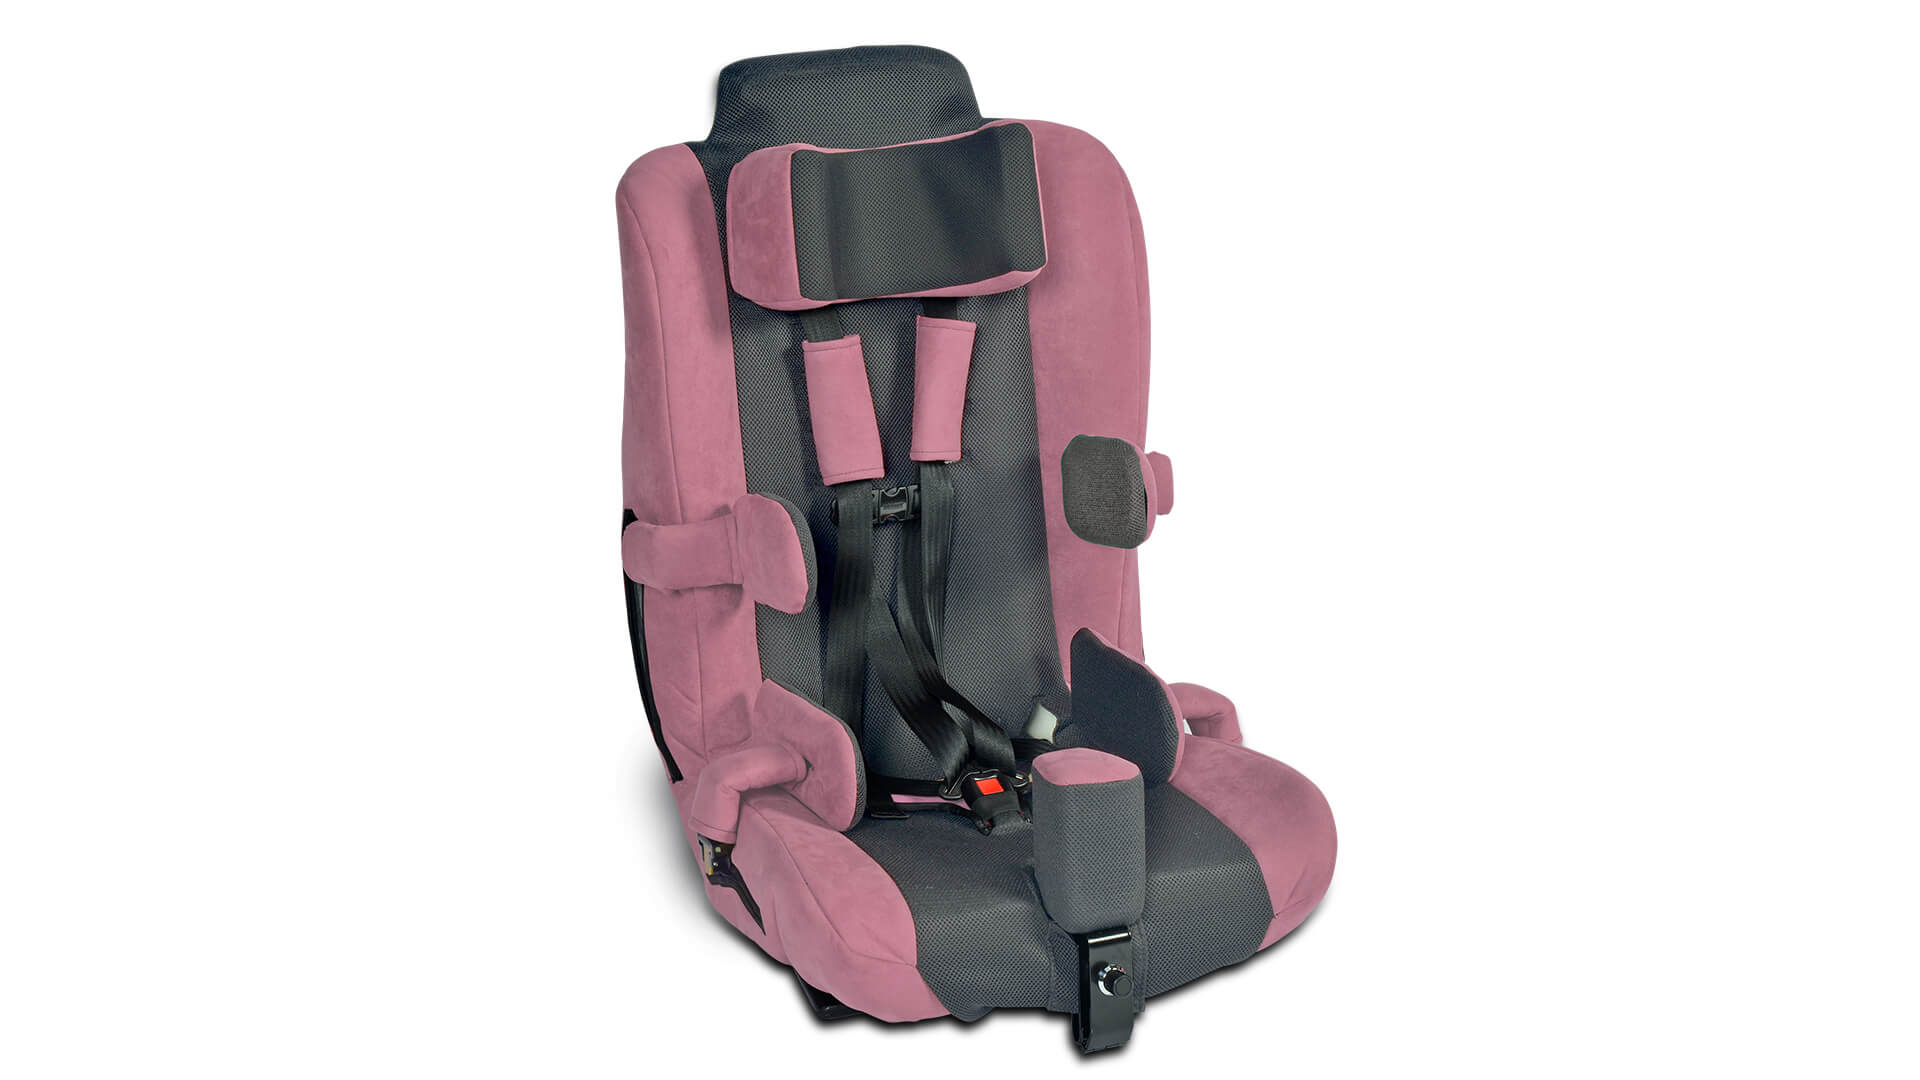 Spirit Plus Car Seat - Inspired by Drive